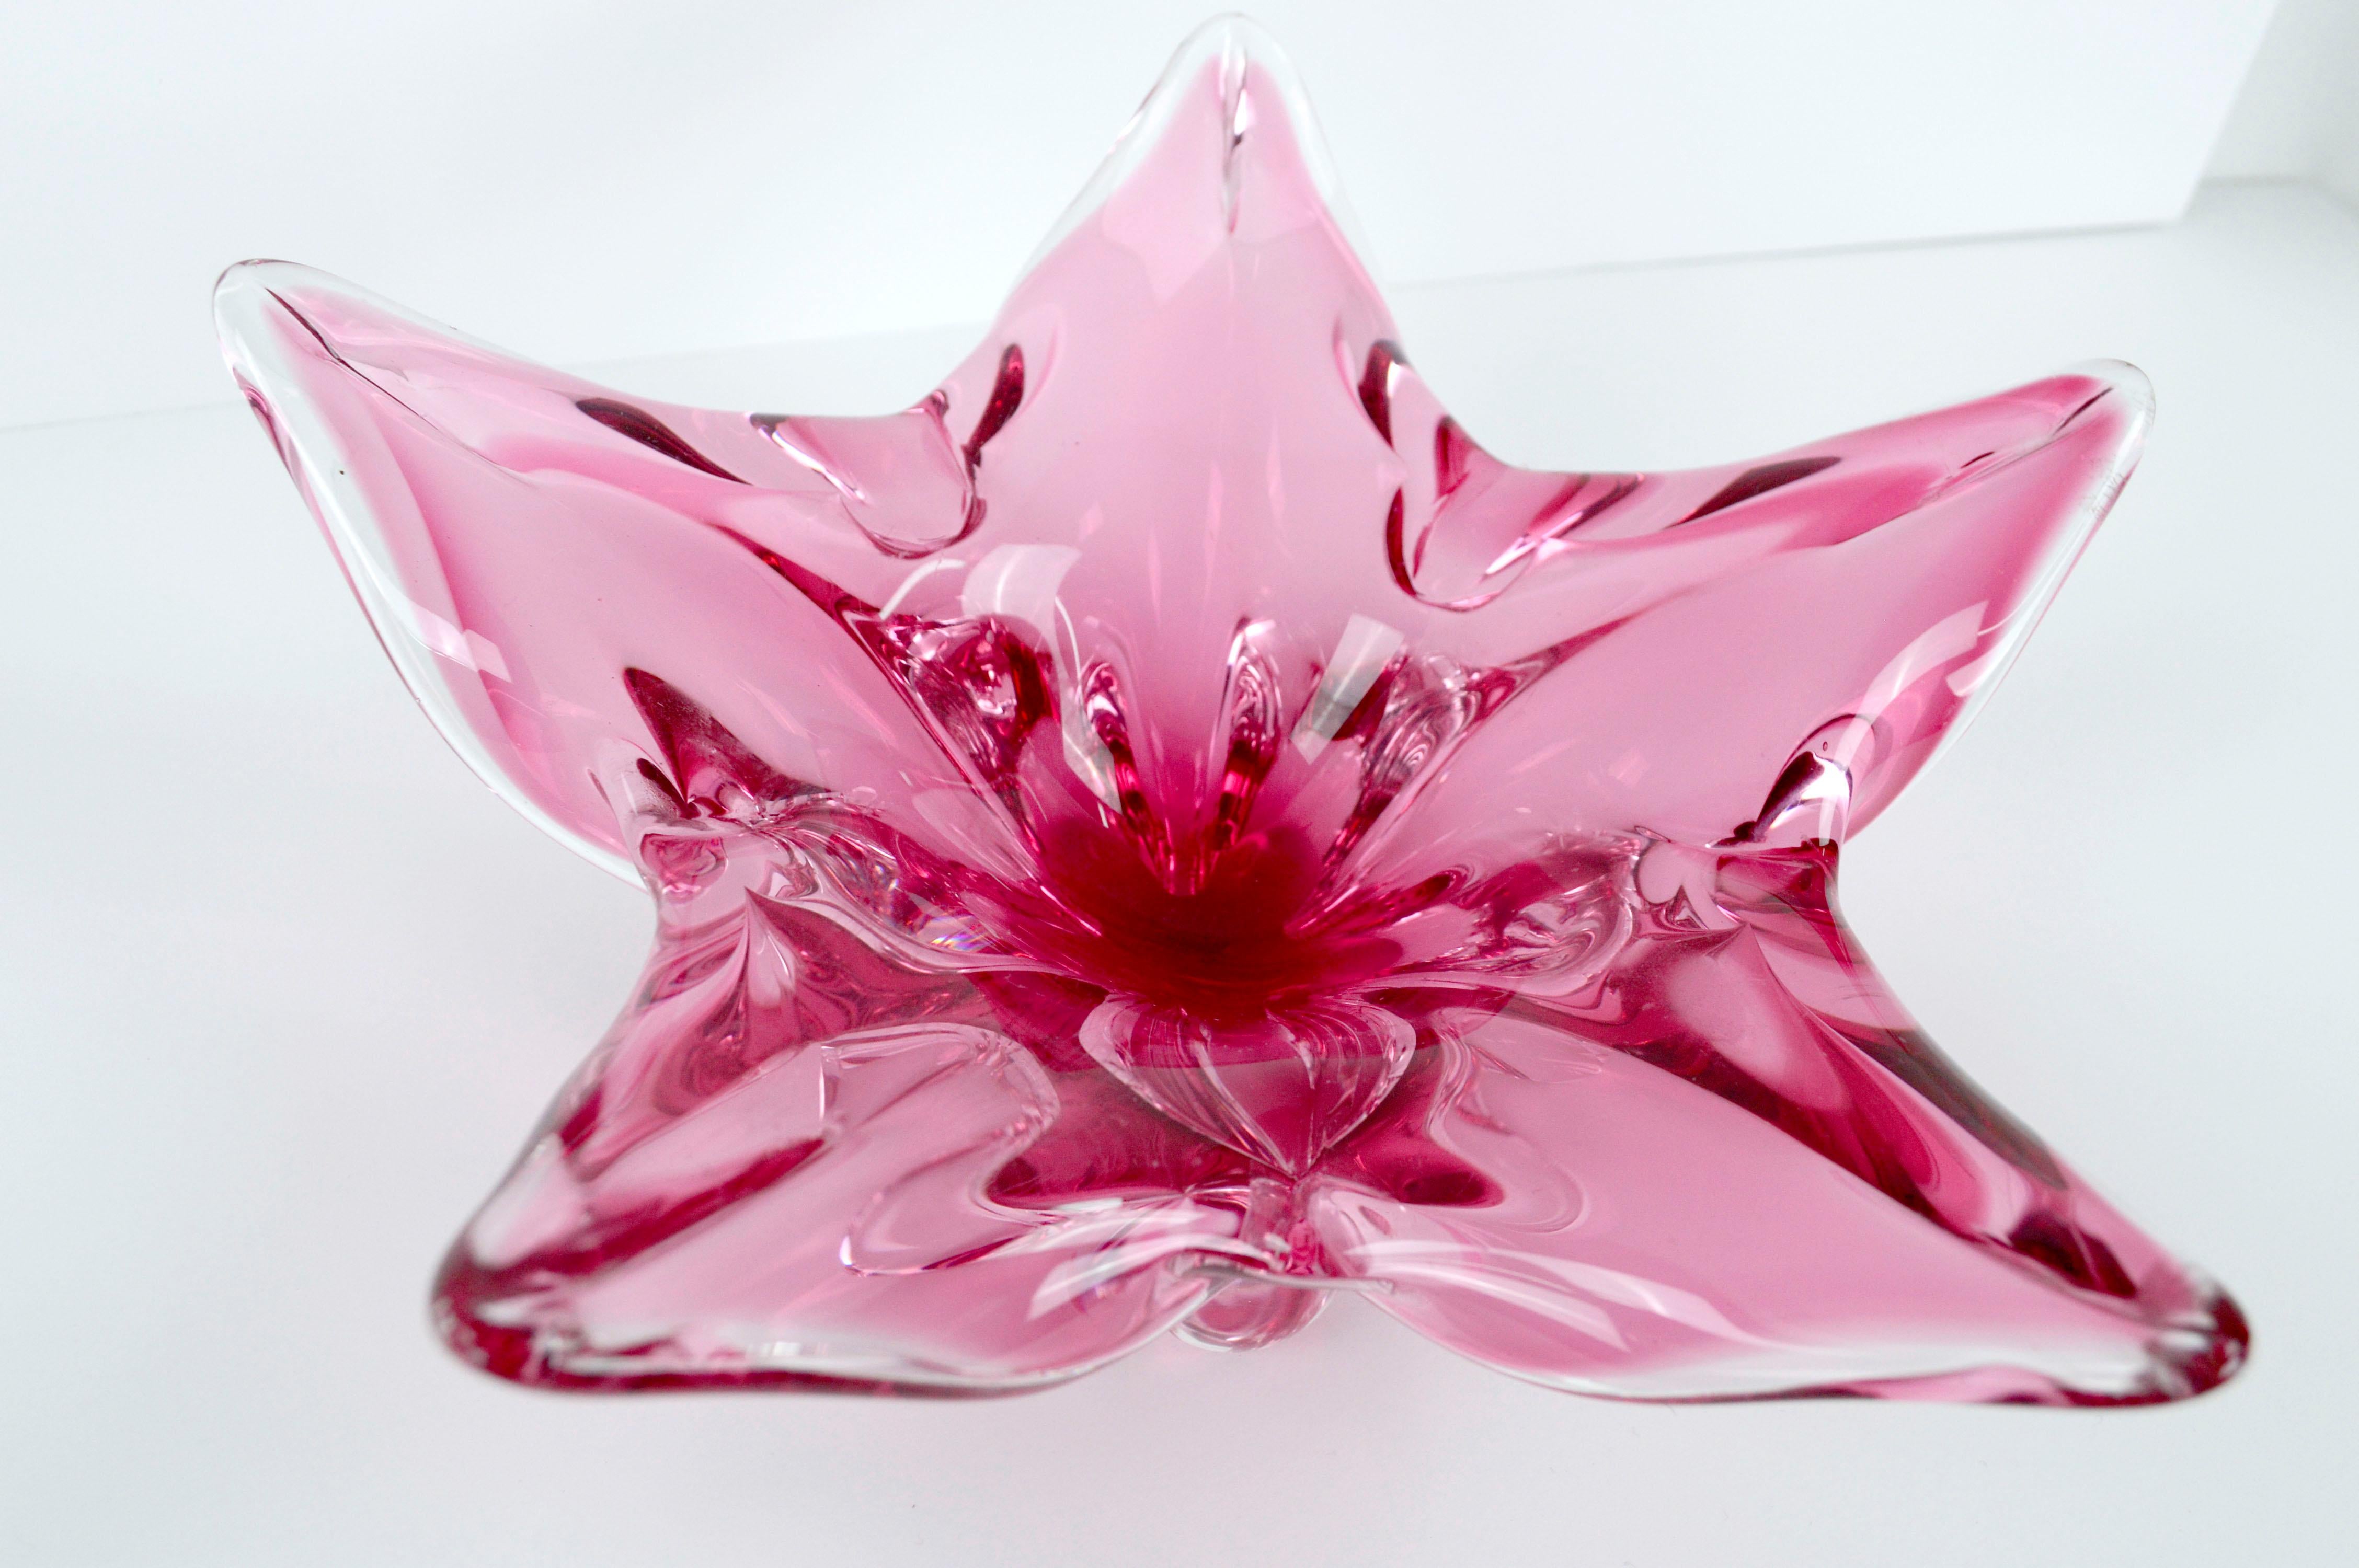 Mid Century Modern Chribska Glassworks, Czech Pink Star Flower Footed Glass Dish

Stunning petaled flower or 5 pointed star-shaped footed hand made glass dish in clear and pink/cranberry by Josef Hospodka (Czechoslavkian, 1923-1989) of SKLO Union